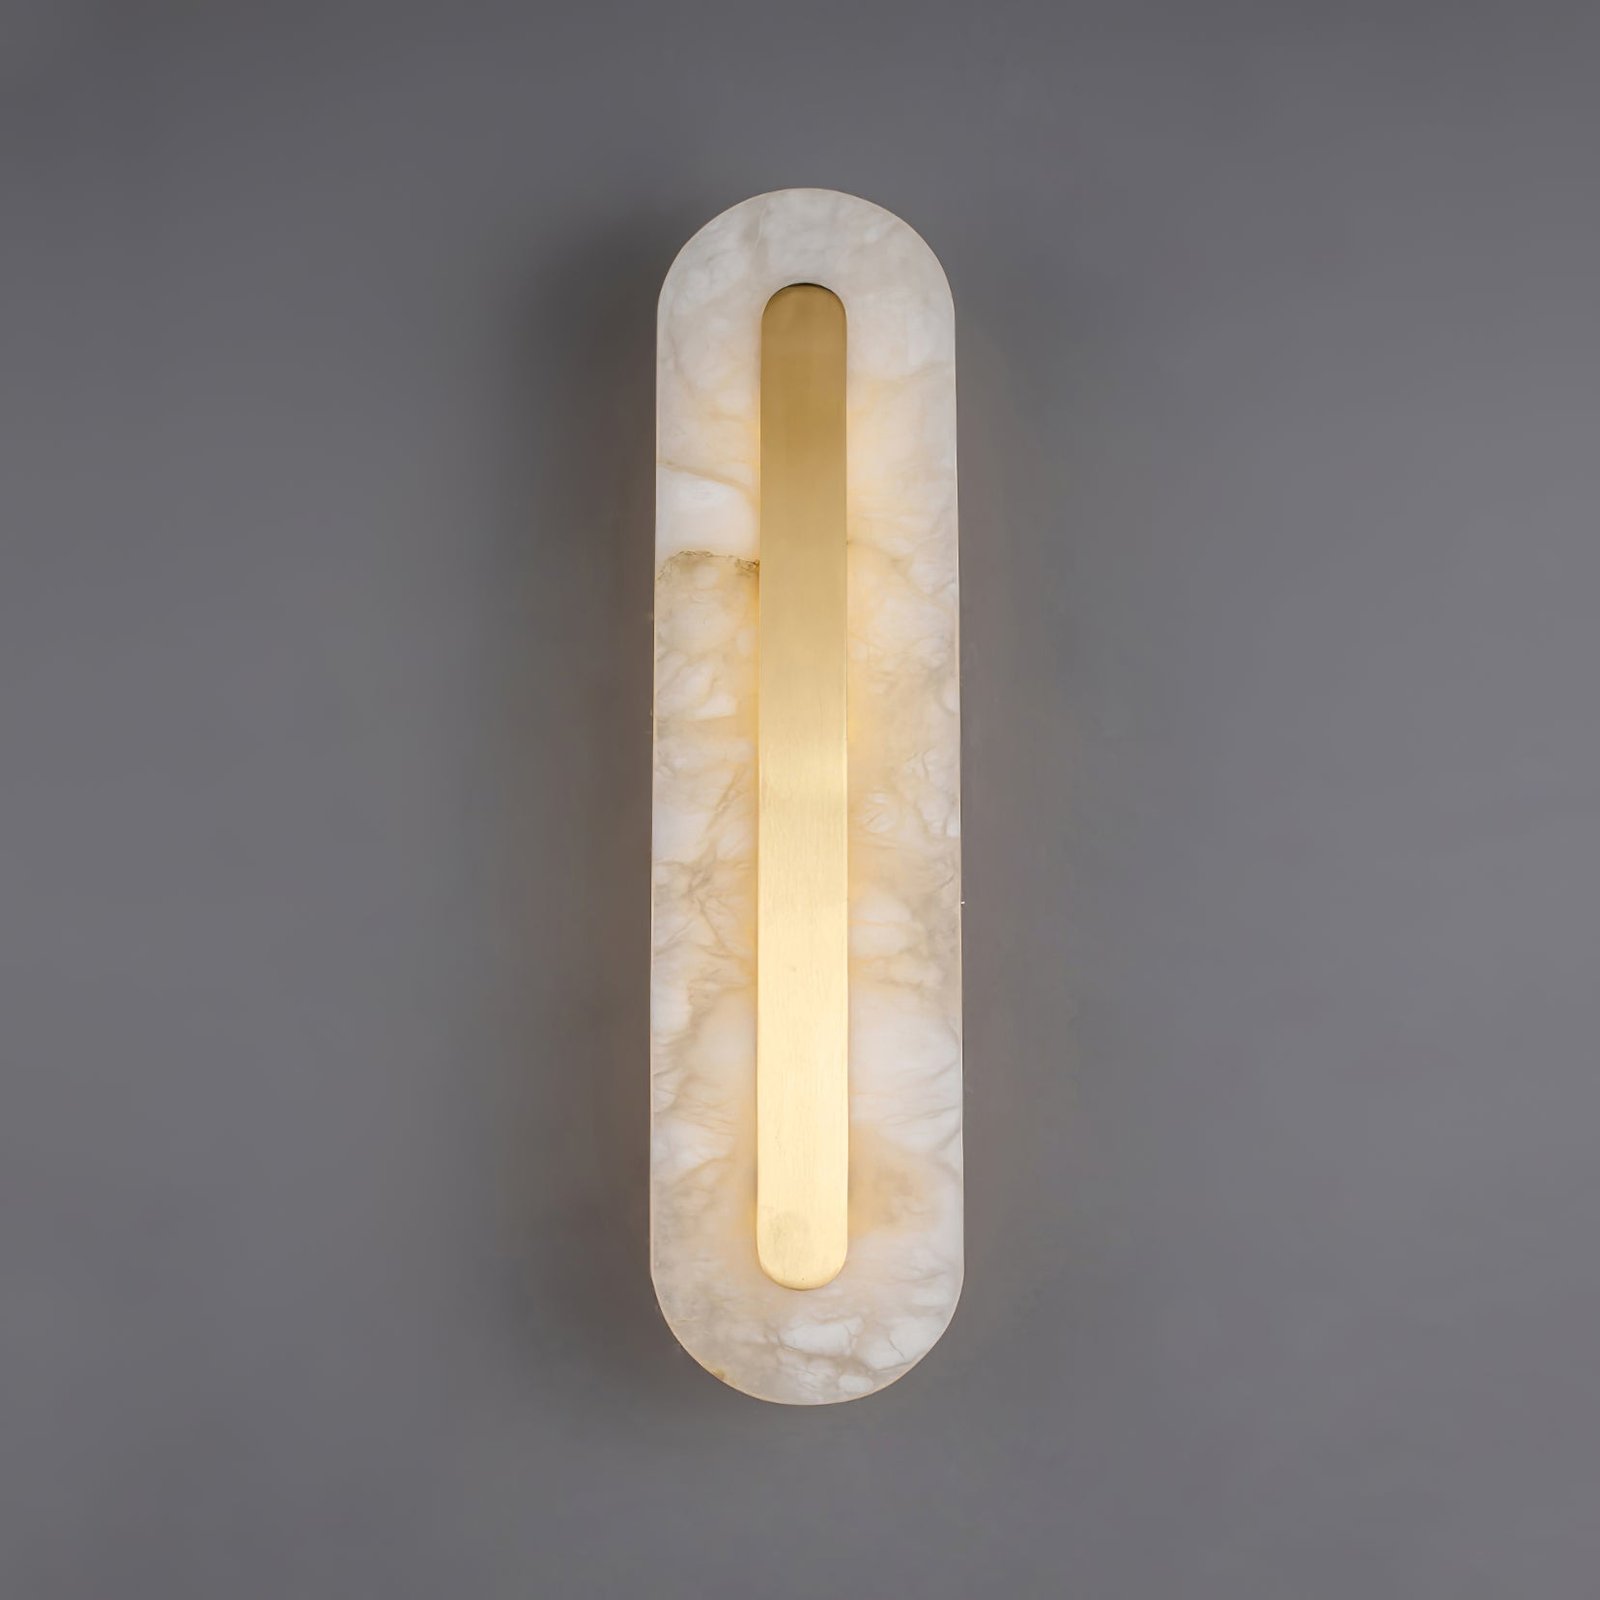 Rounded Wall Light with White and Brass Marble, Cool Light, measuring 5.5 inches in diameter and 19.7 inches in height (14cm x 50cm)